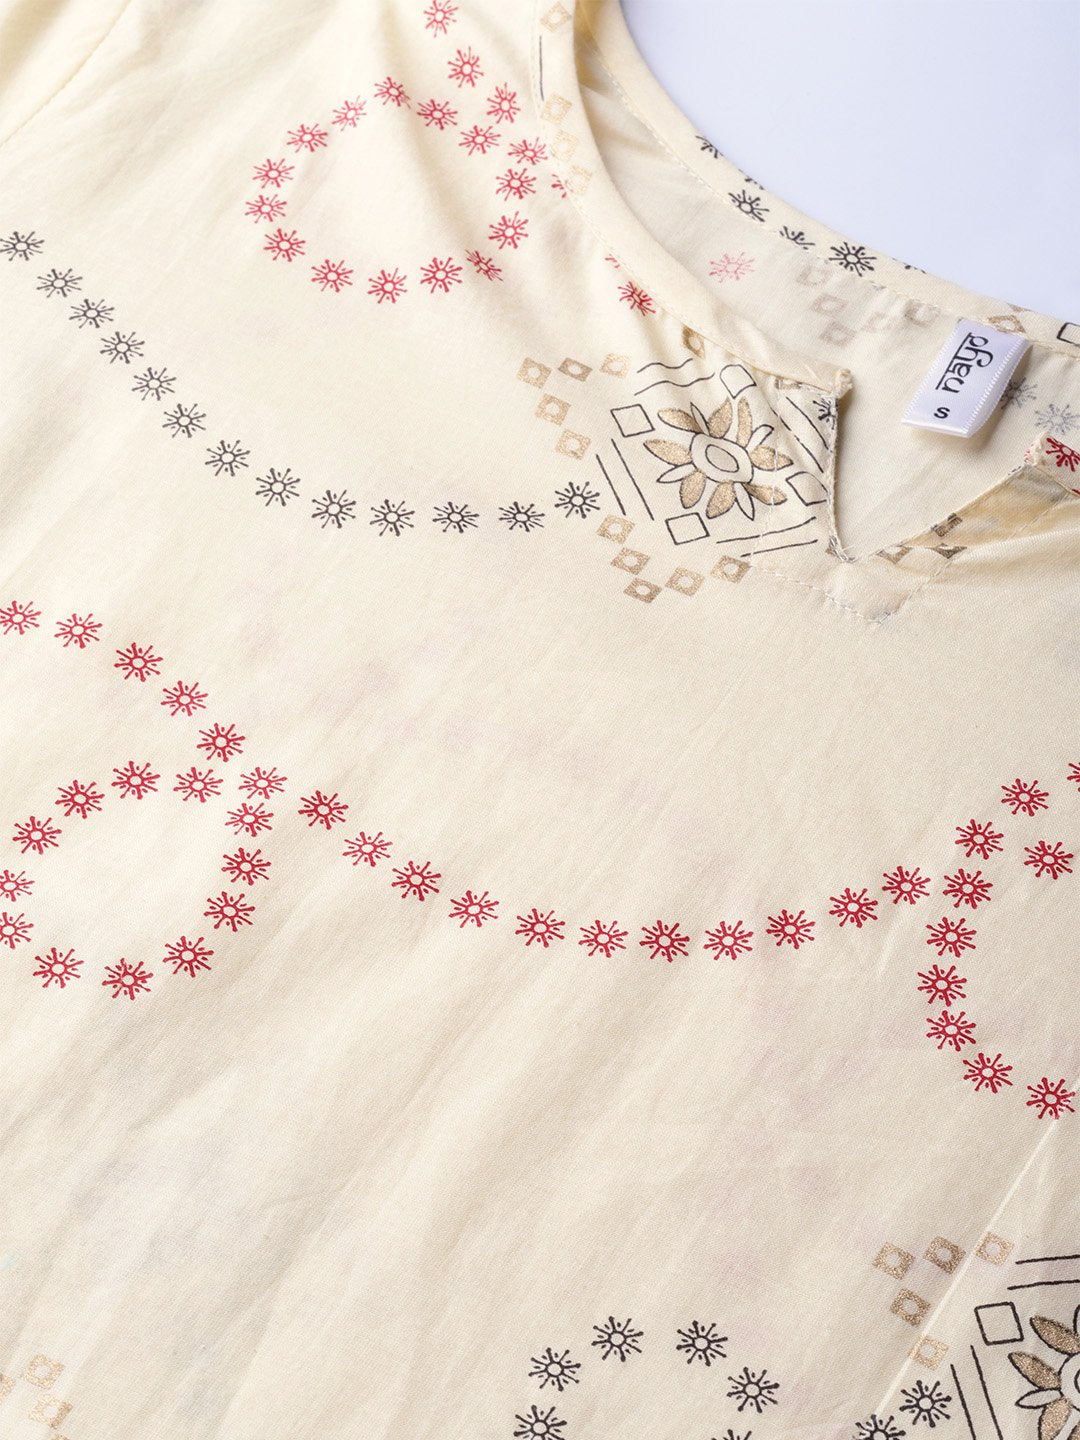 Women's Cream-Coloured & Red Printed Kurta With Trousers - Nayo Clothing